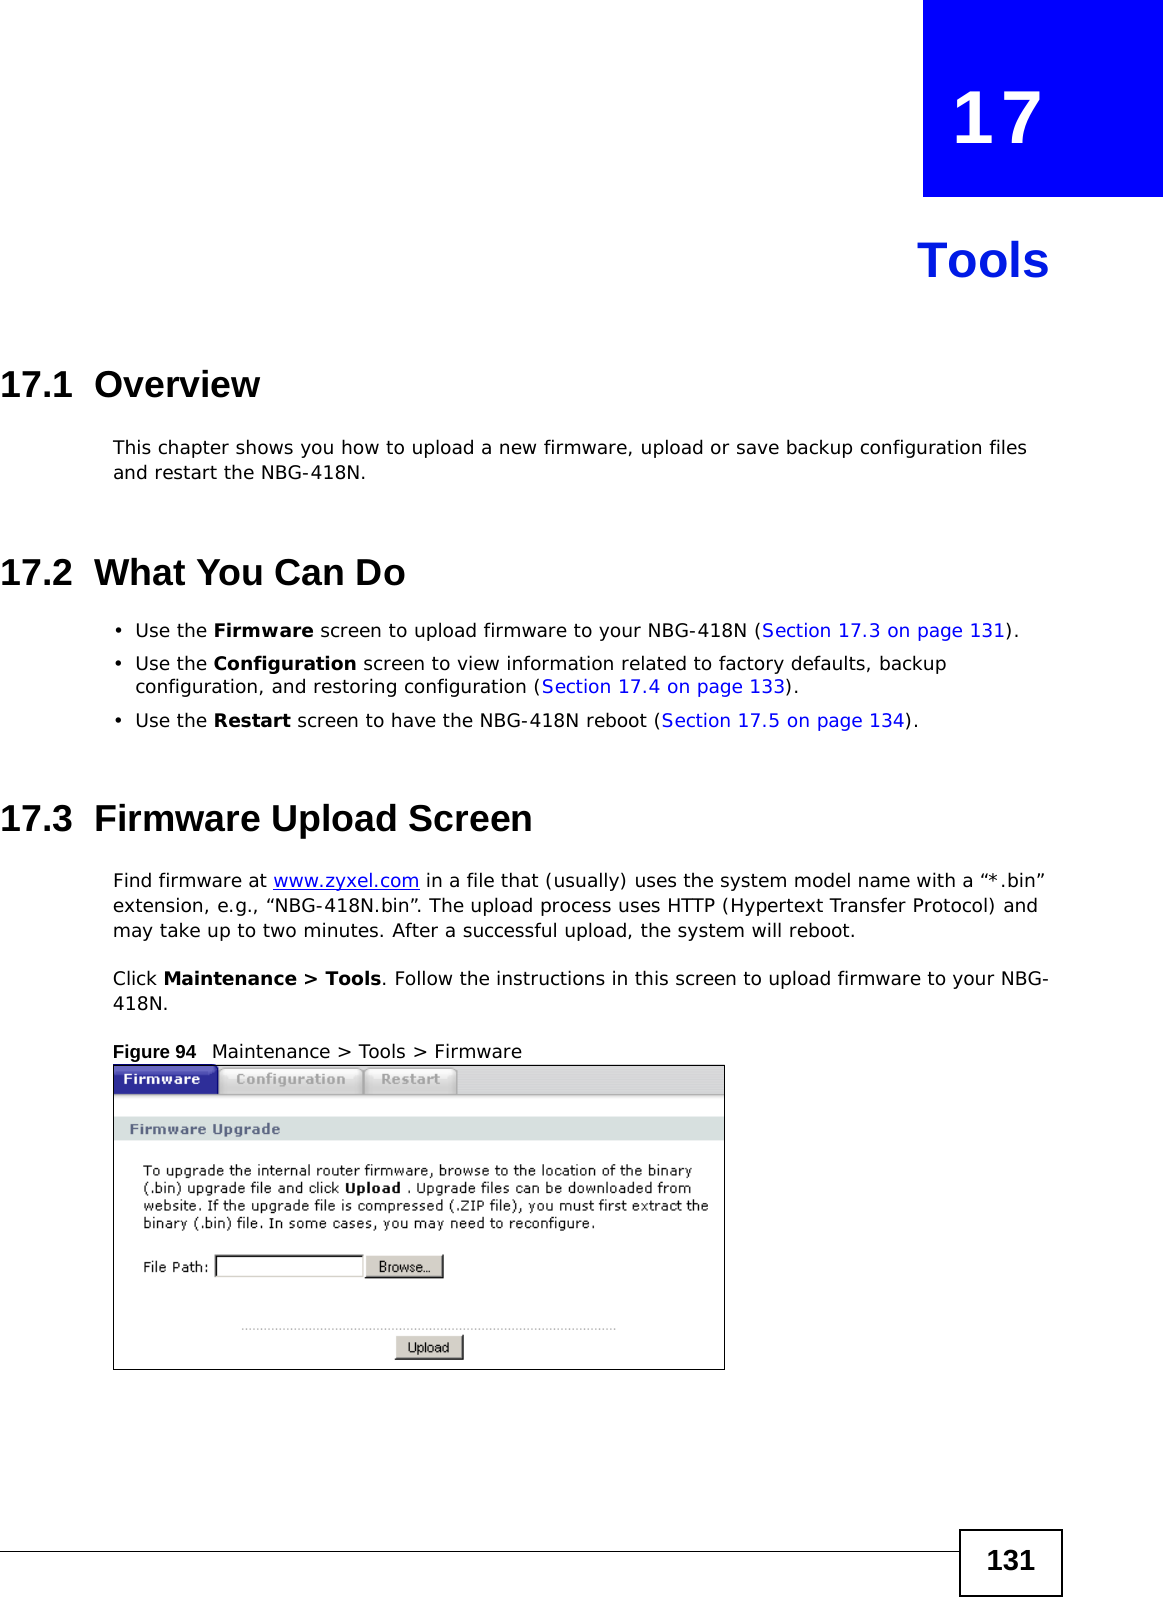 131CHAPTER   17Tools17.1  OverviewThis chapter shows you how to upload a new firmware, upload or save backup configuration files and restart the NBG-418N.17.2  What You Can Do•Use the Firmware screen to upload firmware to your NBG-418N (Section 17.3 on page 131).•Use the Configuration screen to view information related to factory defaults, backup configuration, and restoring configuration (Section 17.4 on page 133).•Use the Restart screen to have the NBG-418N reboot (Section 17.5 on page 134).17.3  Firmware Upload ScreenFind firmware at www.zyxel.com in a file that (usually) uses the system model name with a “*.bin” extension, e.g., “NBG-418N.bin”. The upload process uses HTTP (Hypertext Transfer Protocol) and may take up to two minutes. After a successful upload, the system will reboot.Click Maintenance &gt; Tools. Follow the instructions in this screen to upload firmware to your NBG-418N. Figure 94   Maintenance &gt; Tools &gt; Firmware 